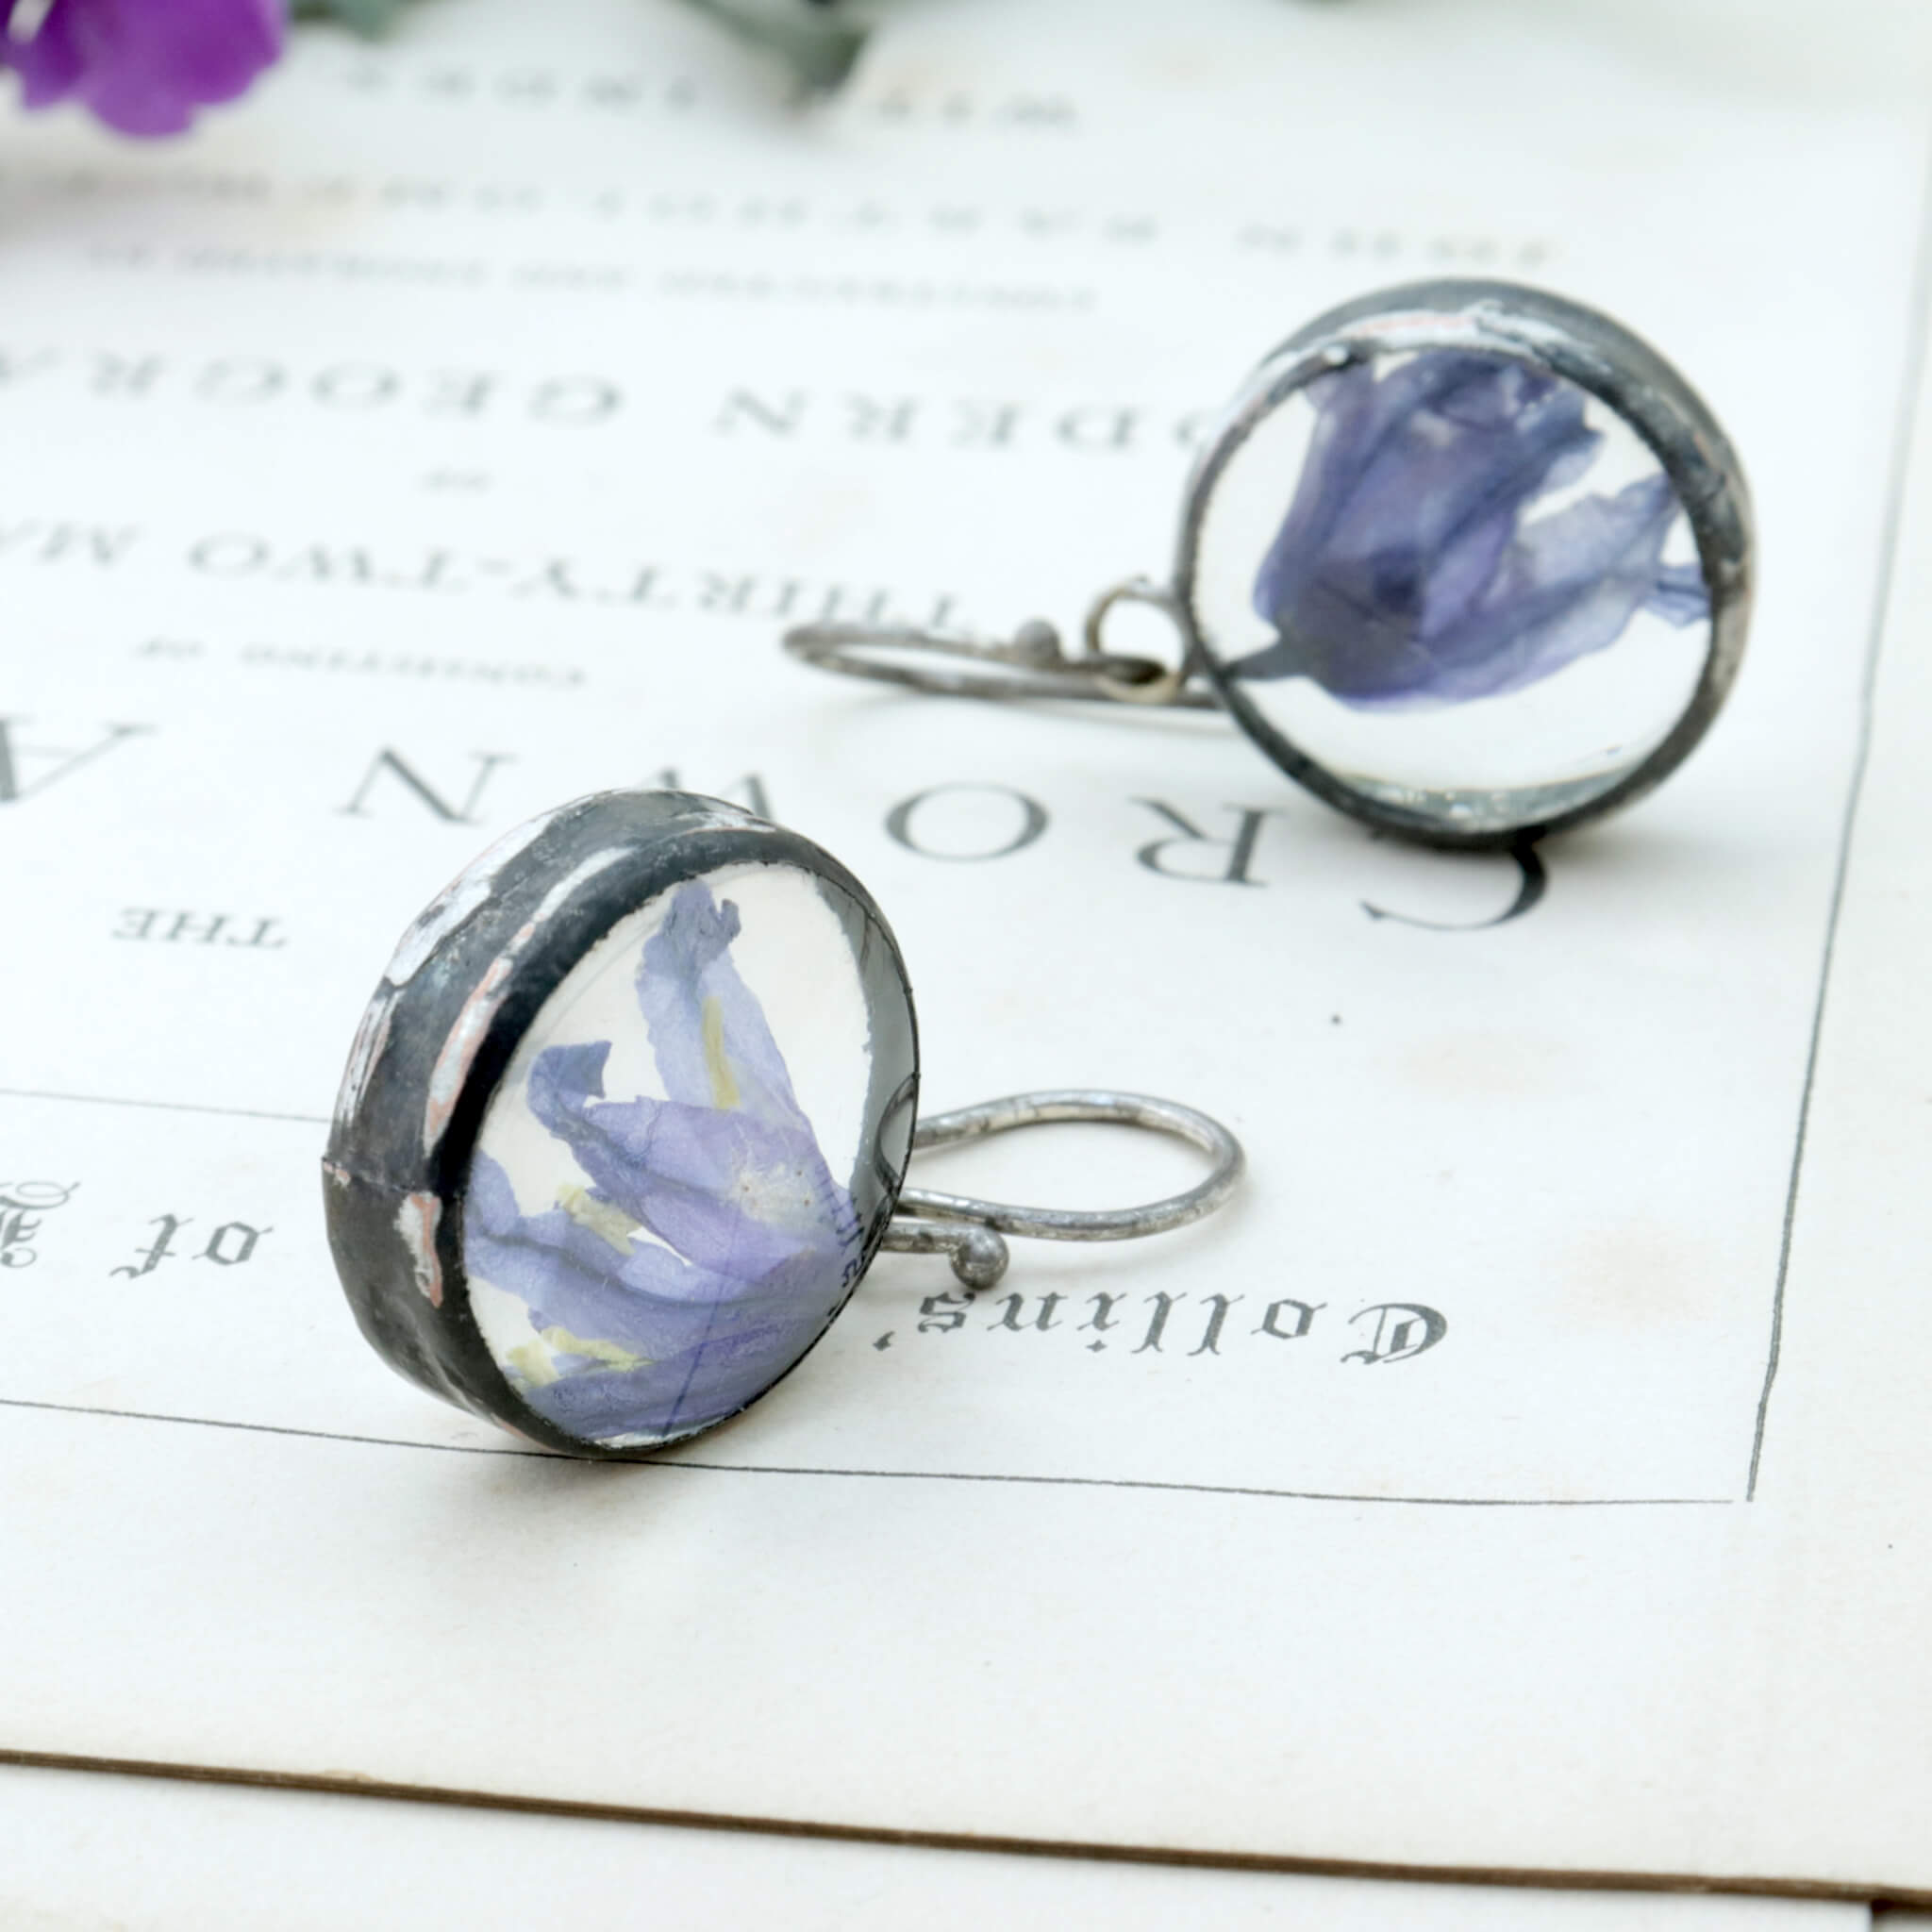 Earrings with real bluebells lying on an old photograph